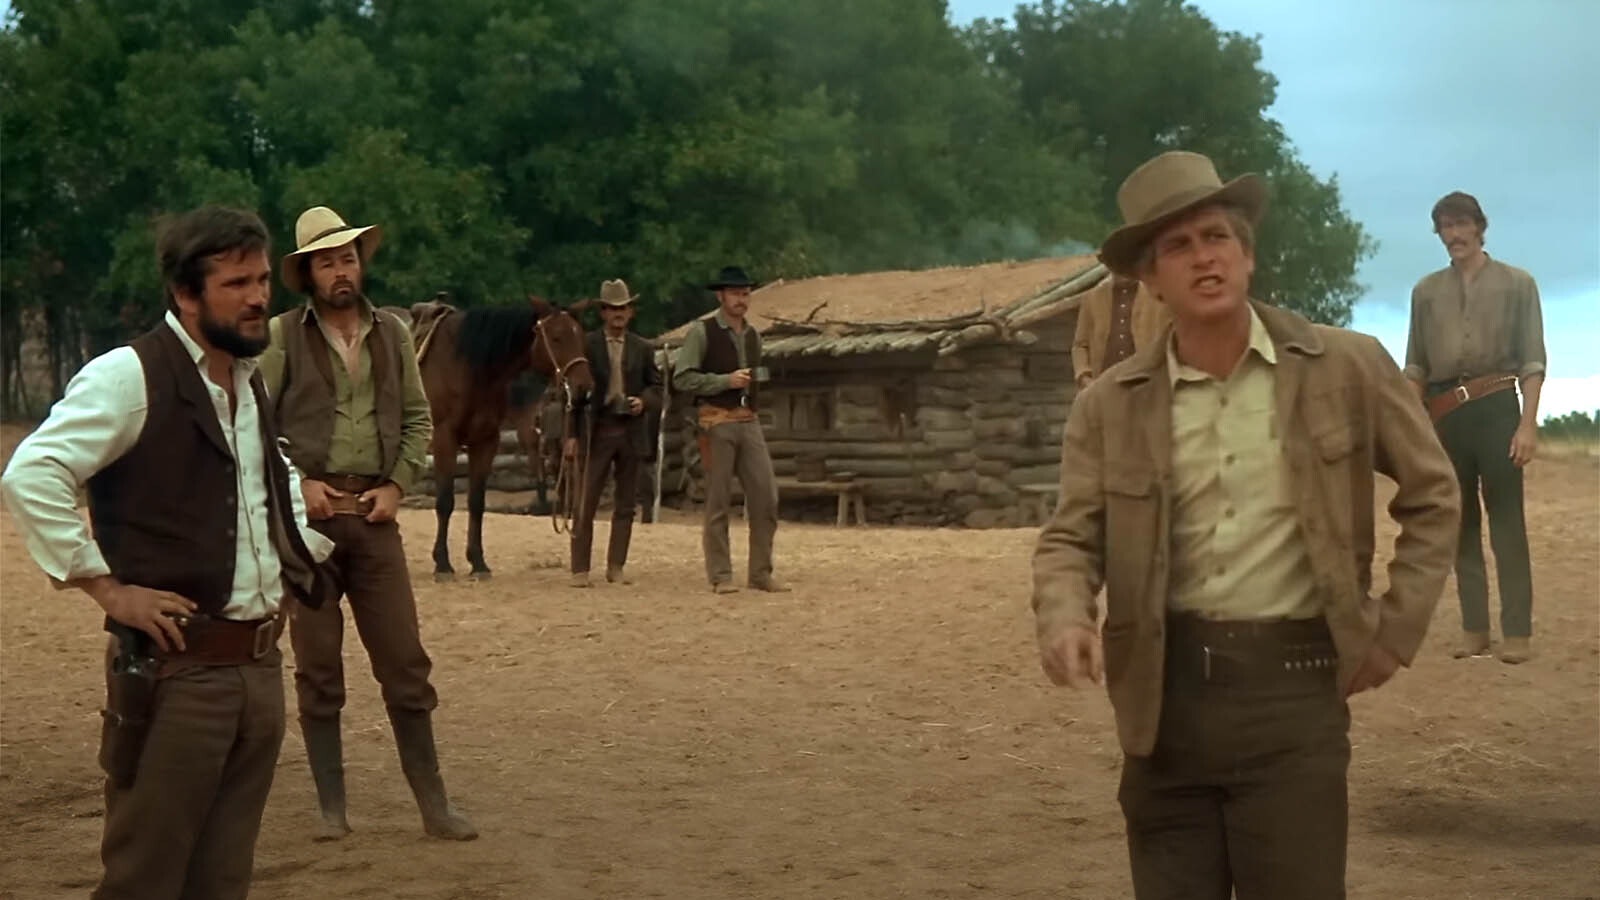 Paul Newman as Butch Cassidy with the Hole in the Wall Gang in a scene from "Butch Cassidy and the Sundance Kid."